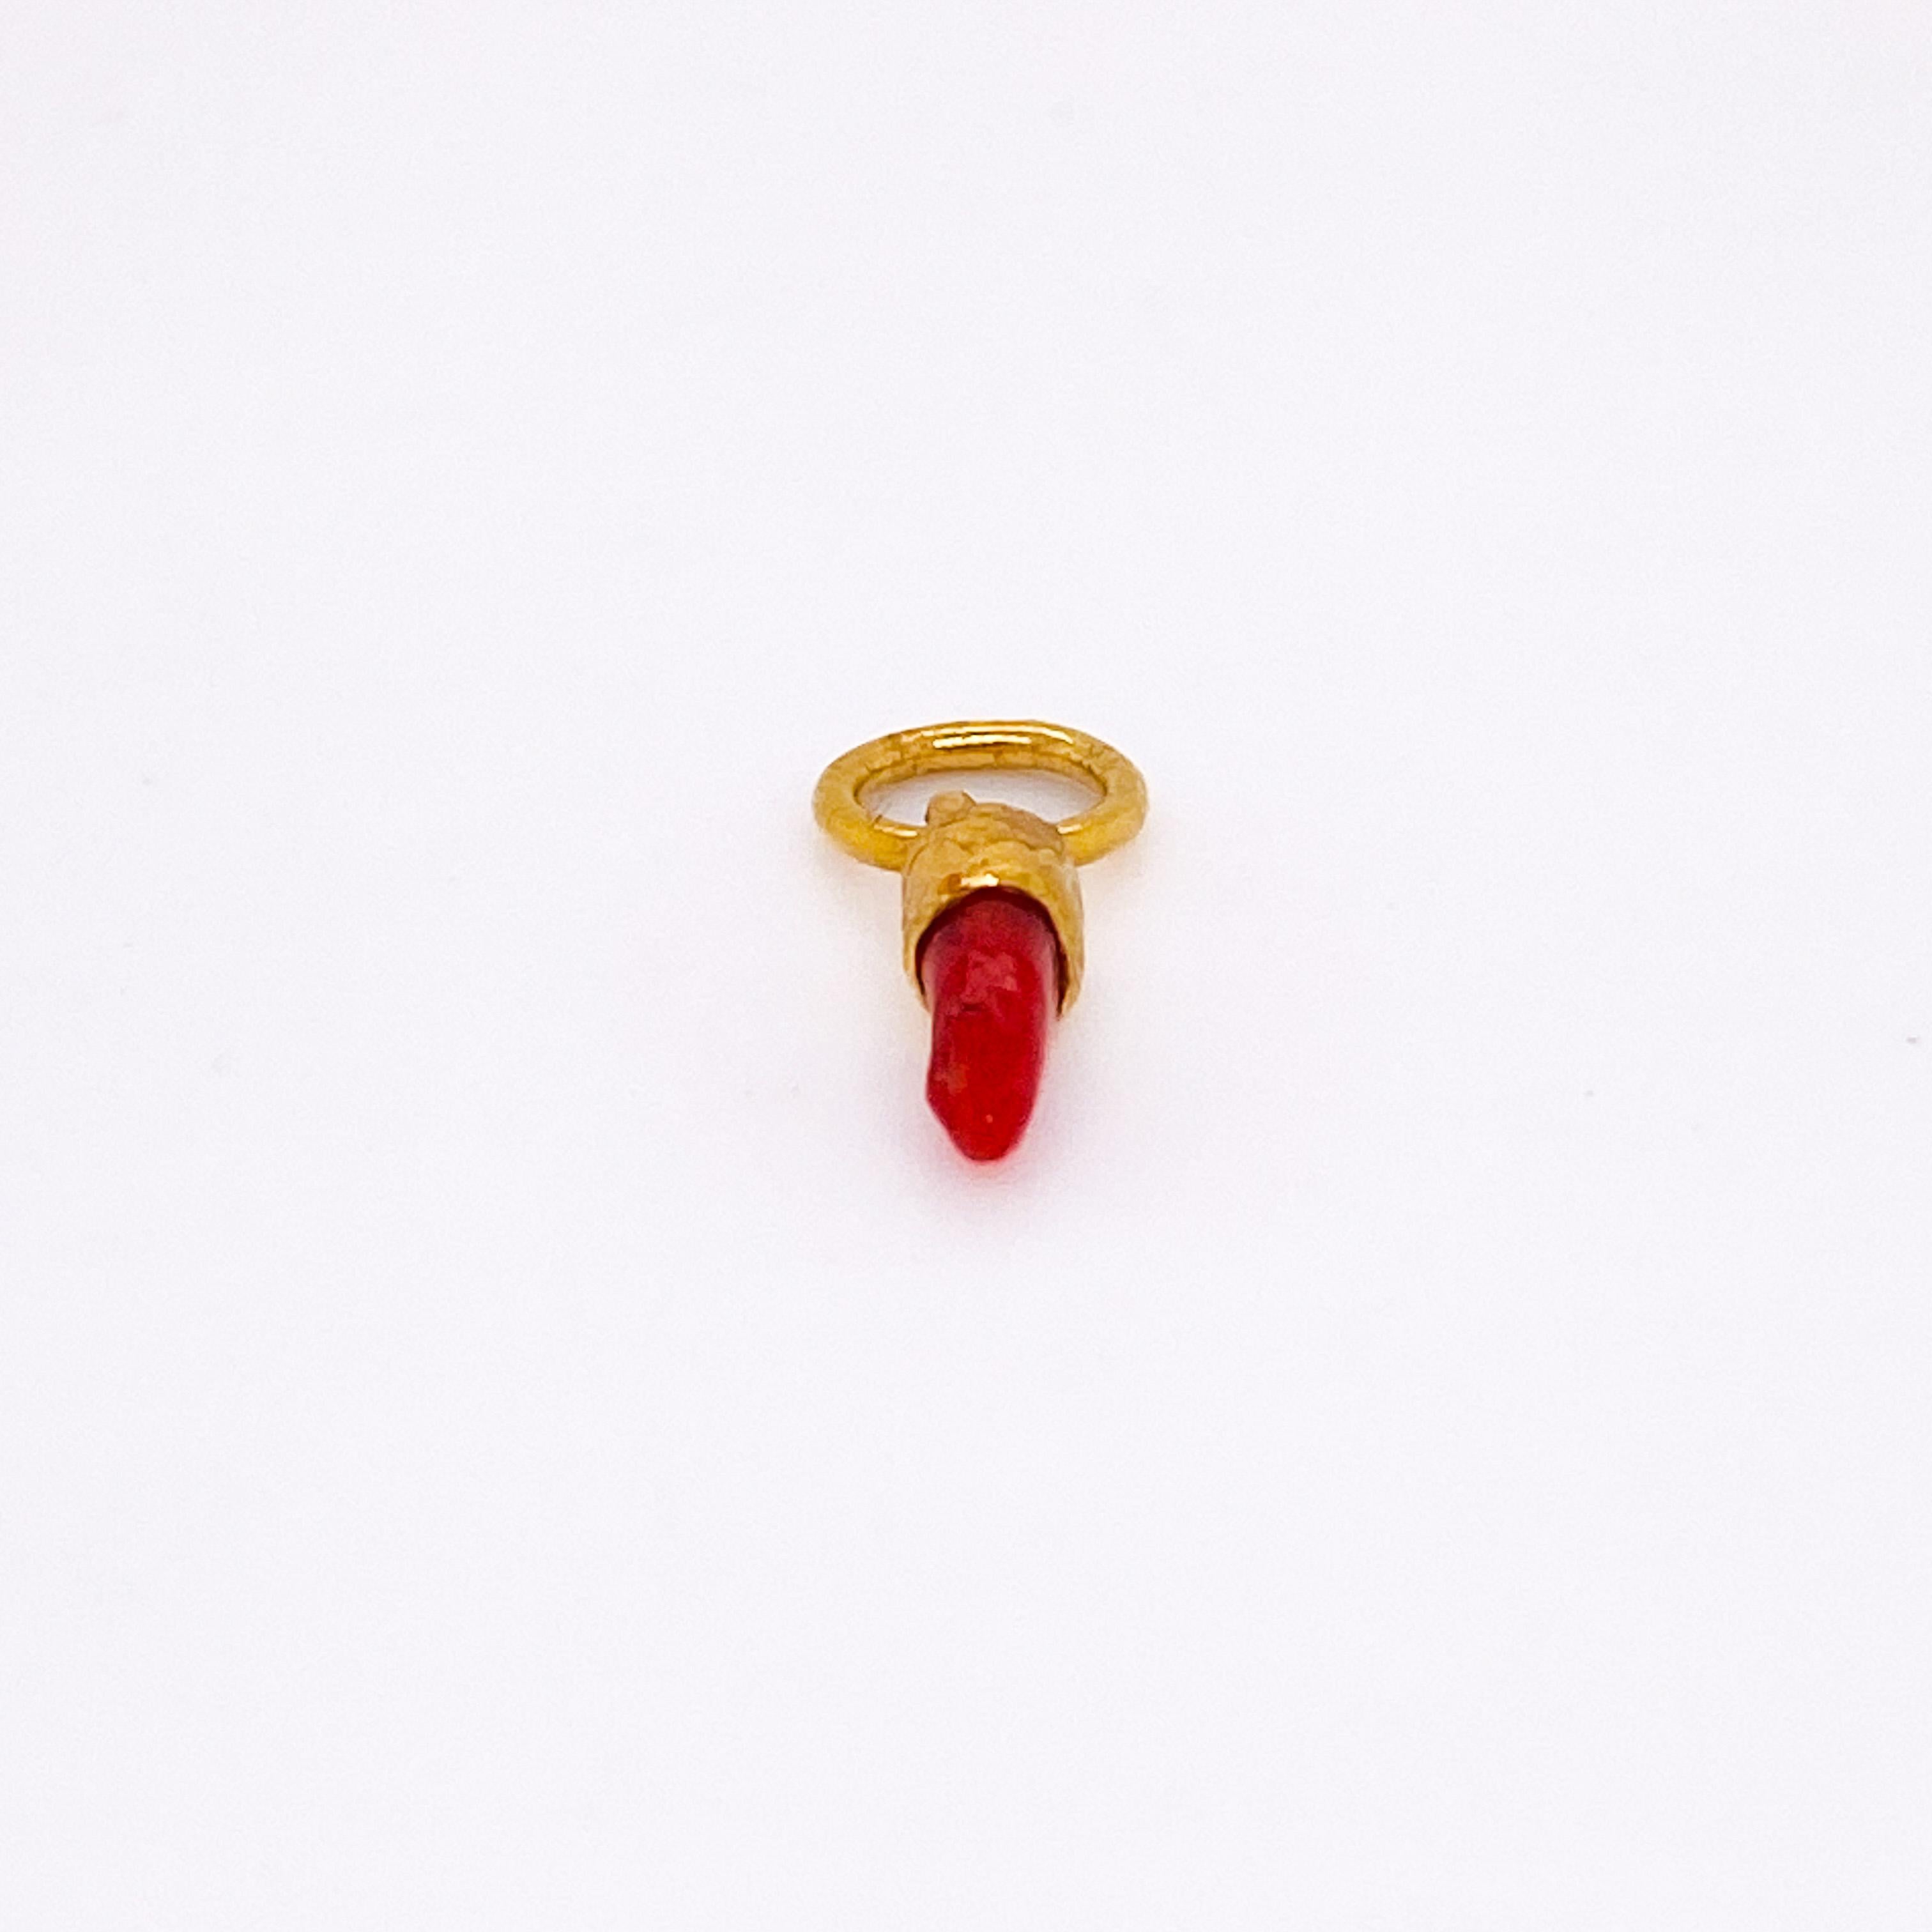 This unique 24 karat pure gold pendant (or charm) has a piece of red coral set in it. The pendant is handmade from 24 karat gold and looks great on any chain or charm bracelet. The coral is sourced from the Adriatic Sea around Croatia. There is only